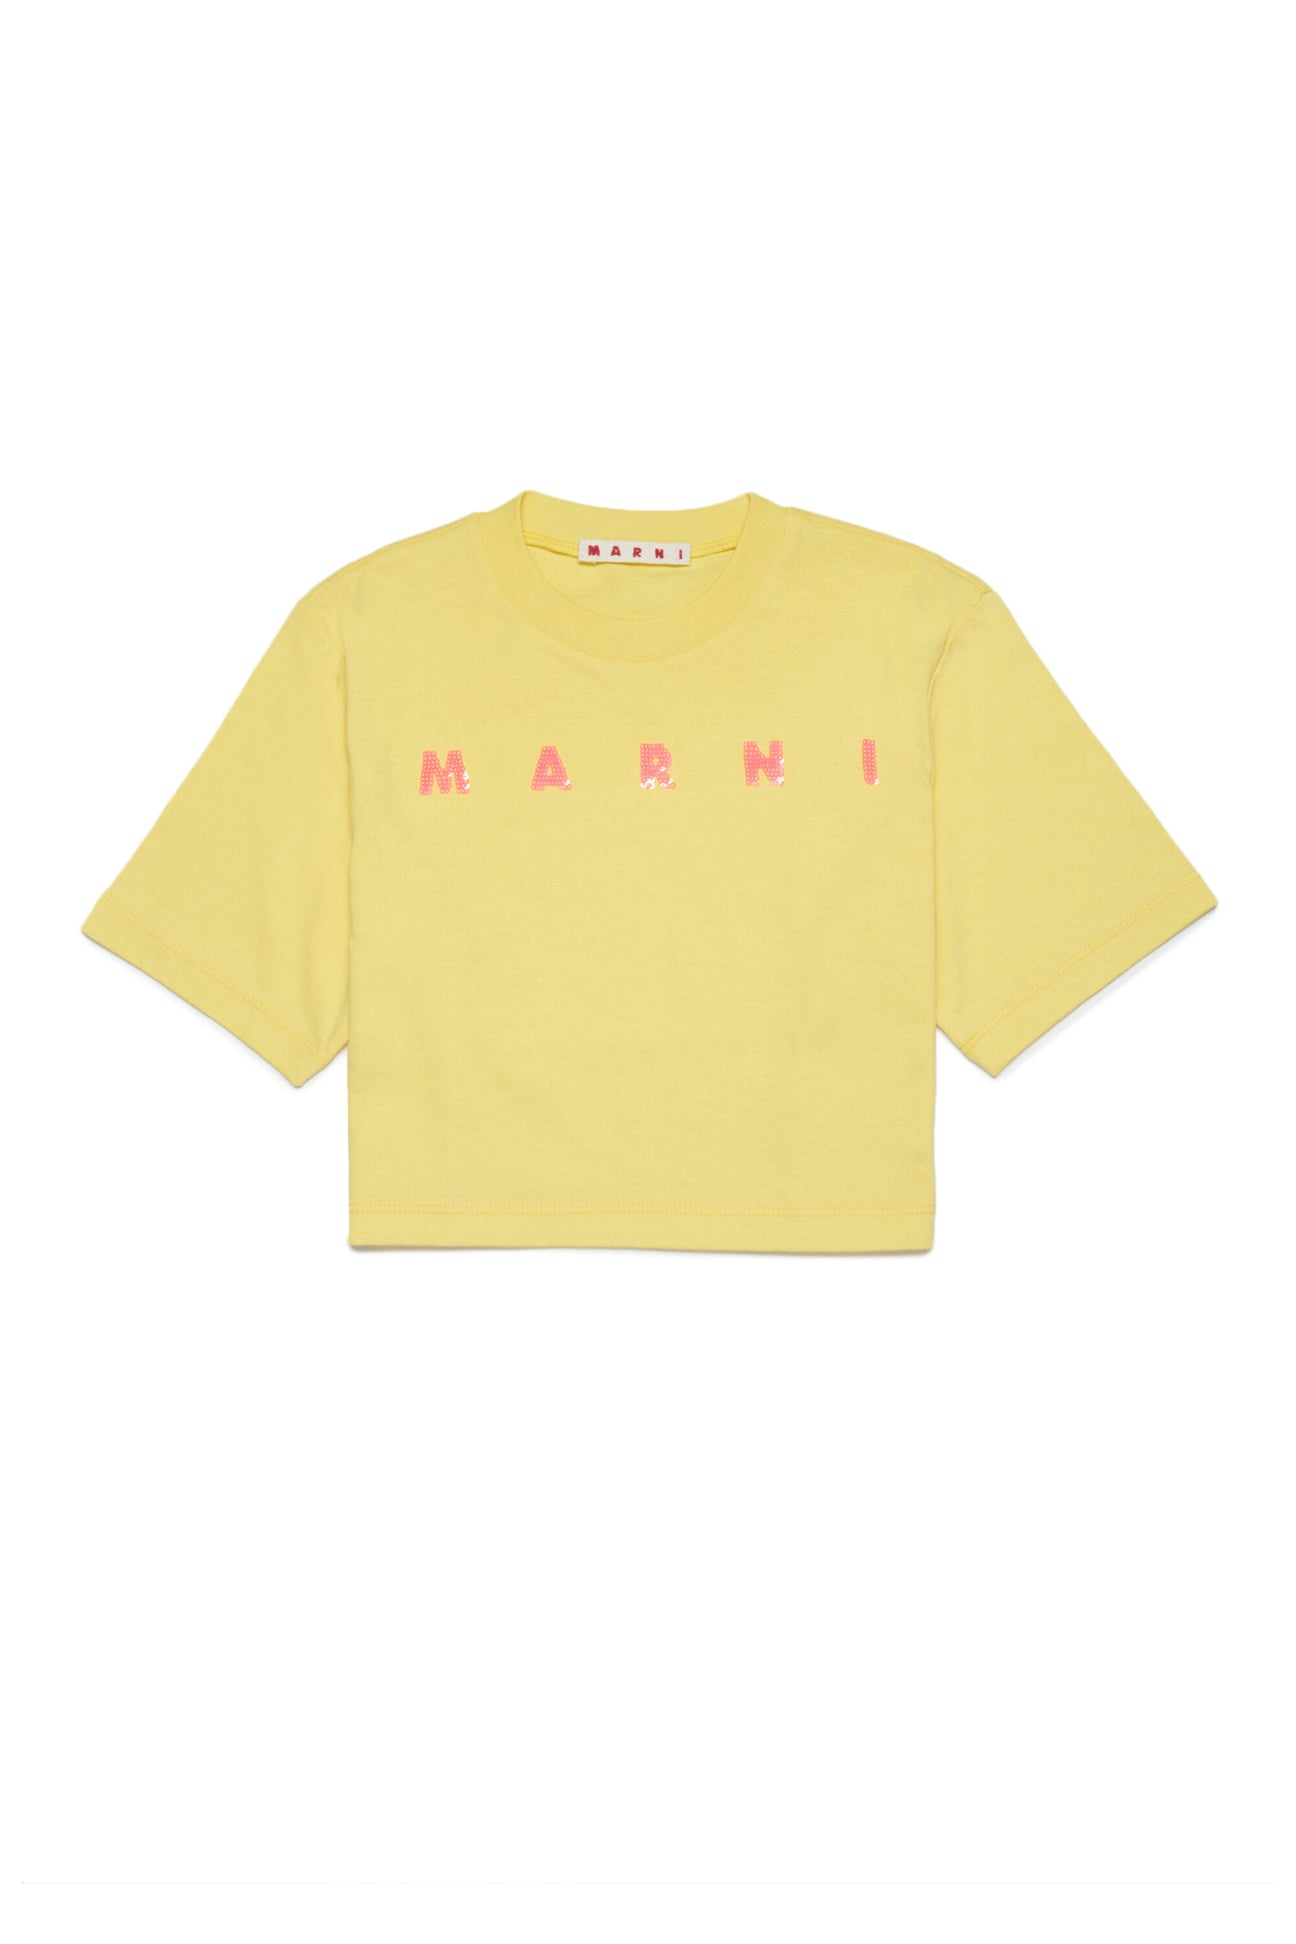 Marni Clothing Outlet for Babies, Kids and Teens | Brave Kid